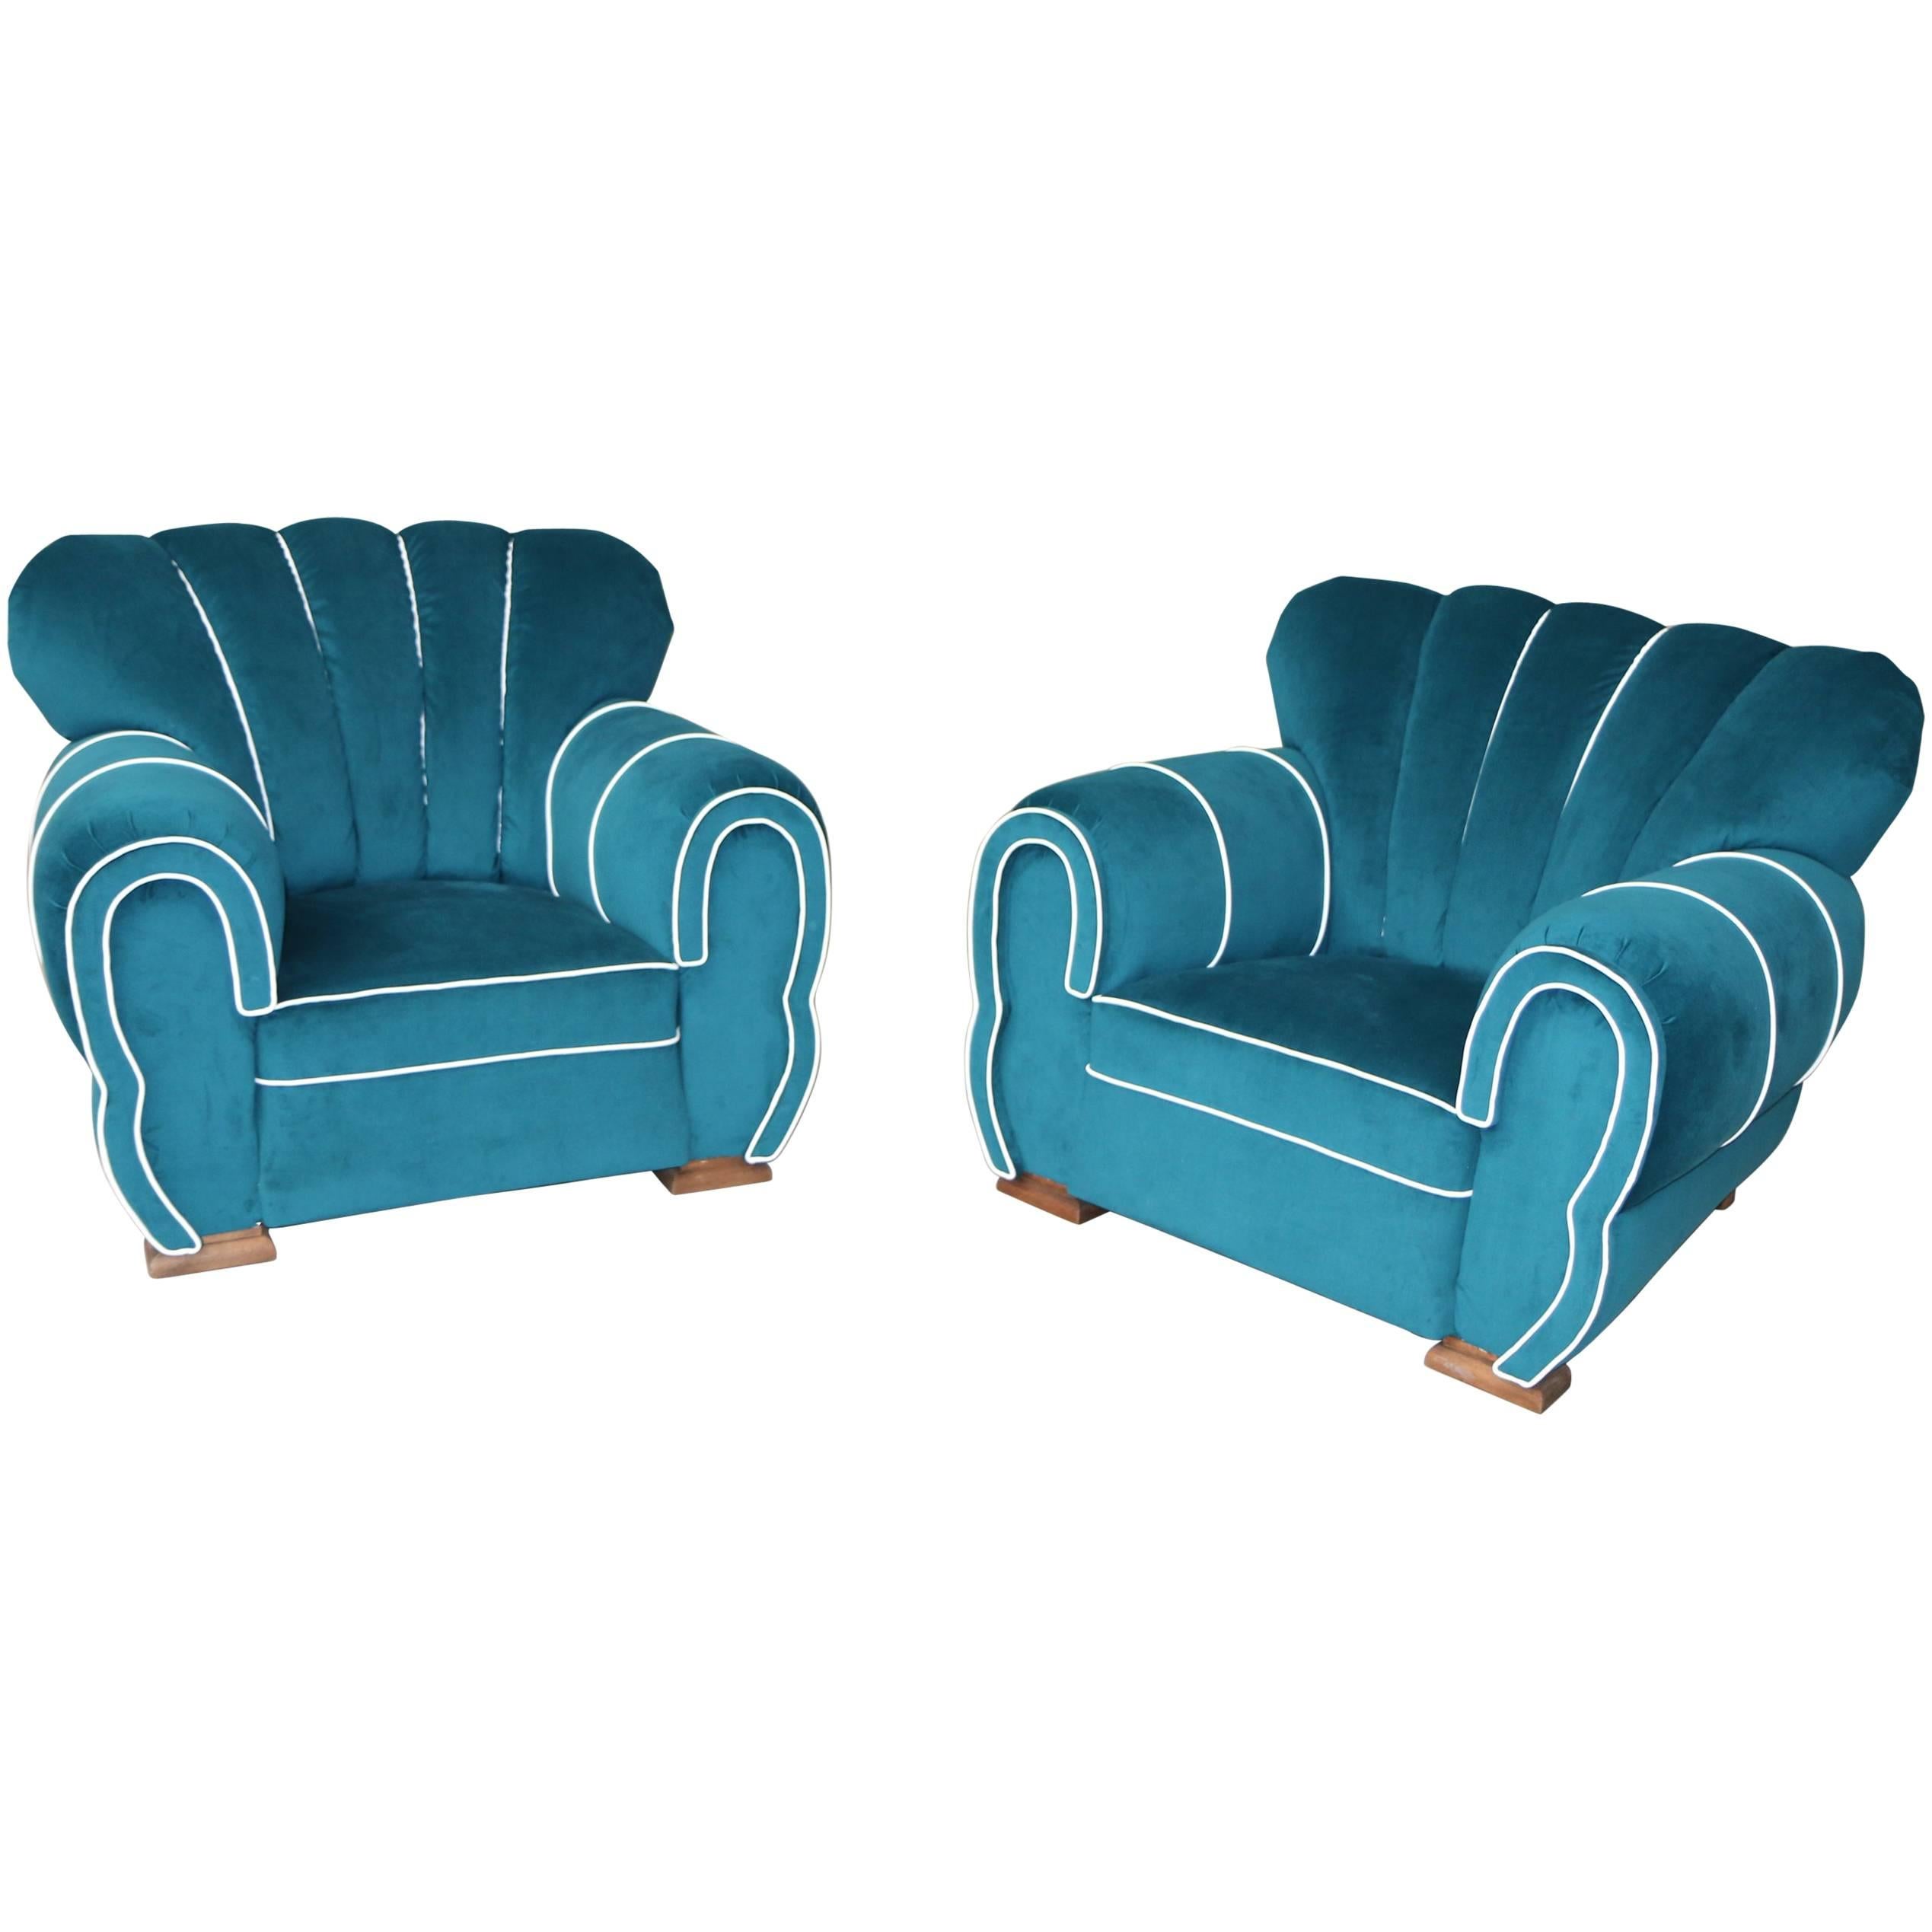 Stunning Pair of Fully Restored French Art Deco Oversized "Elephant" Chairs